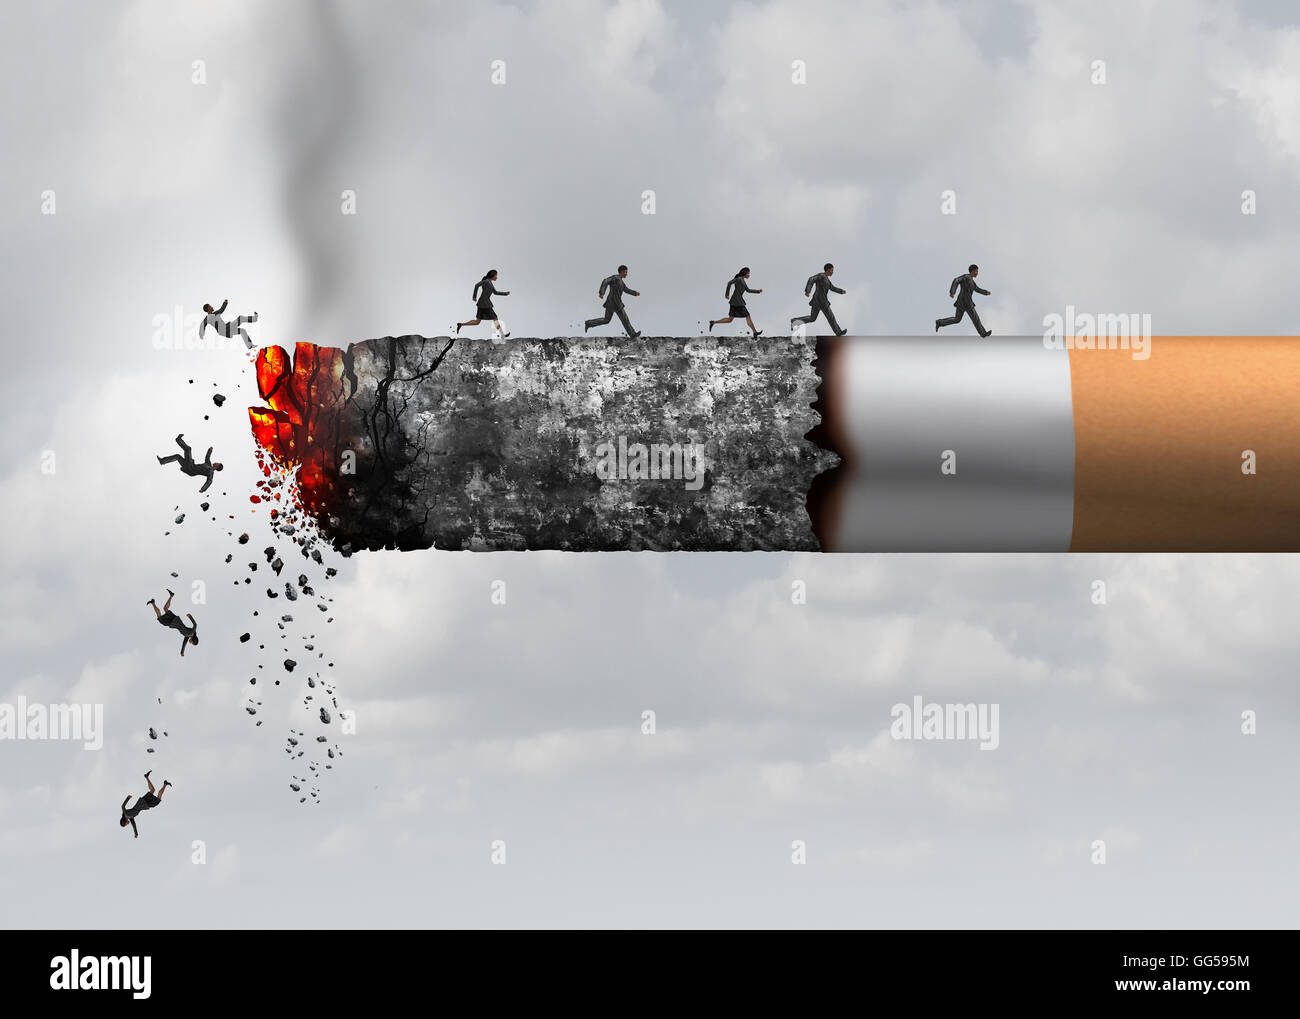 Smoking death and danger concept as a cigarette burning with people falling and escaping the hot burning ash as a metaphor for toxic smoke exposure causing lung cancer and lethal health risks with 3D illustration elements. Stock Photo